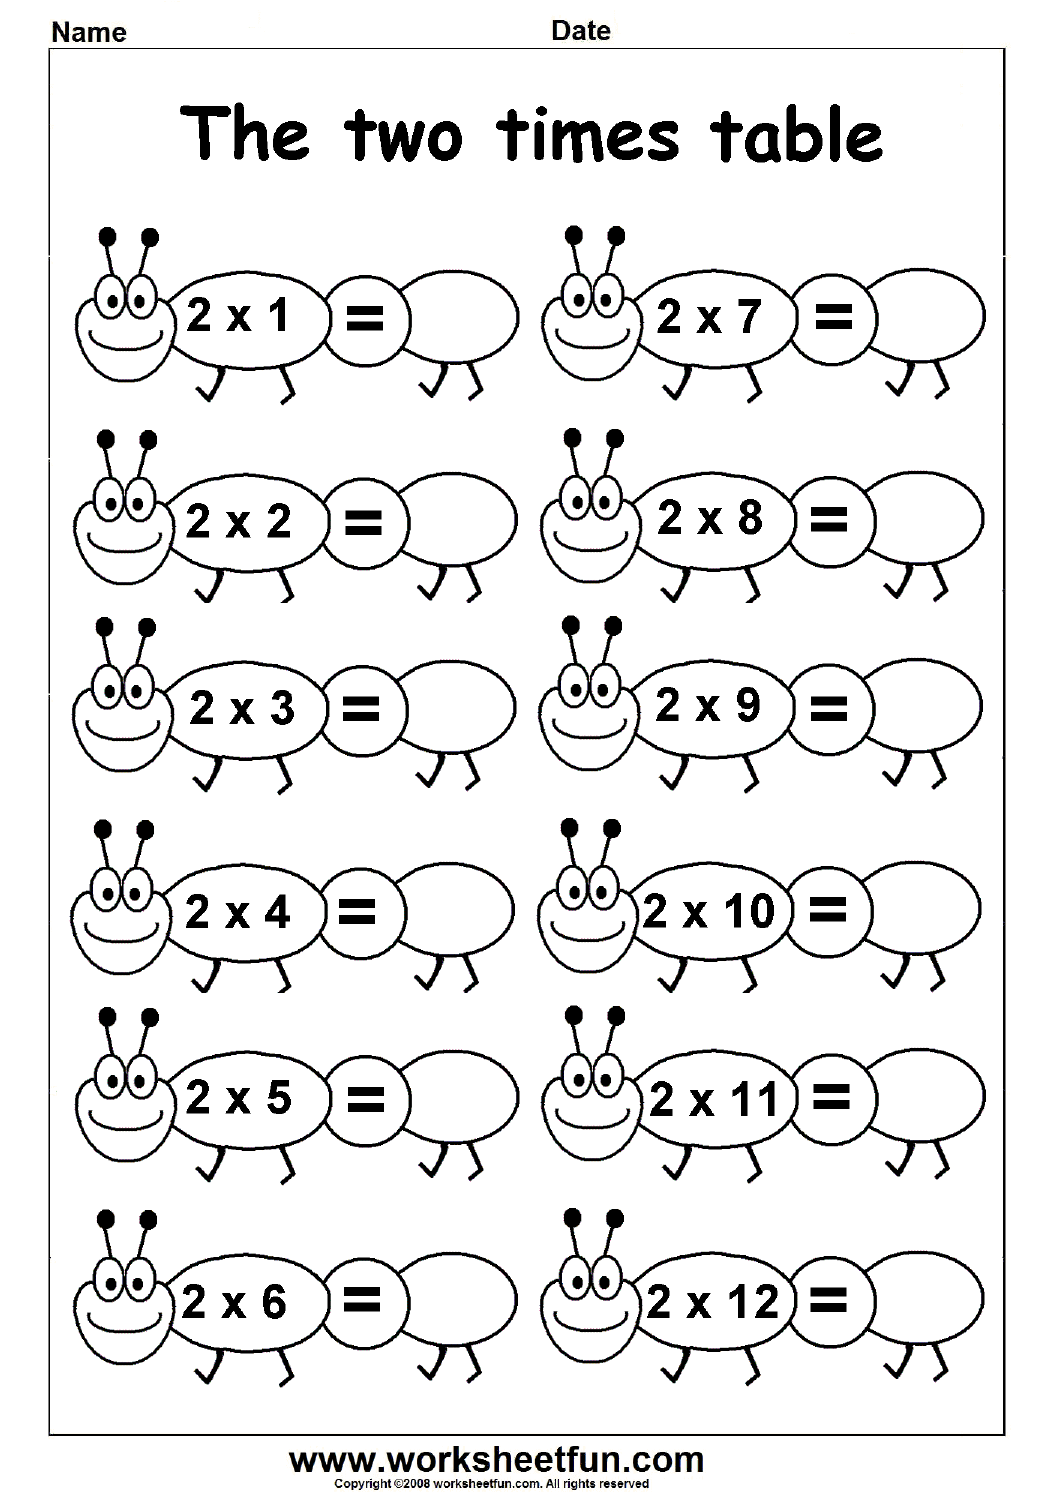 multiplication-times-tables-worksheets-2-3-4-5-6-7-times-tables-six-worksheets-free